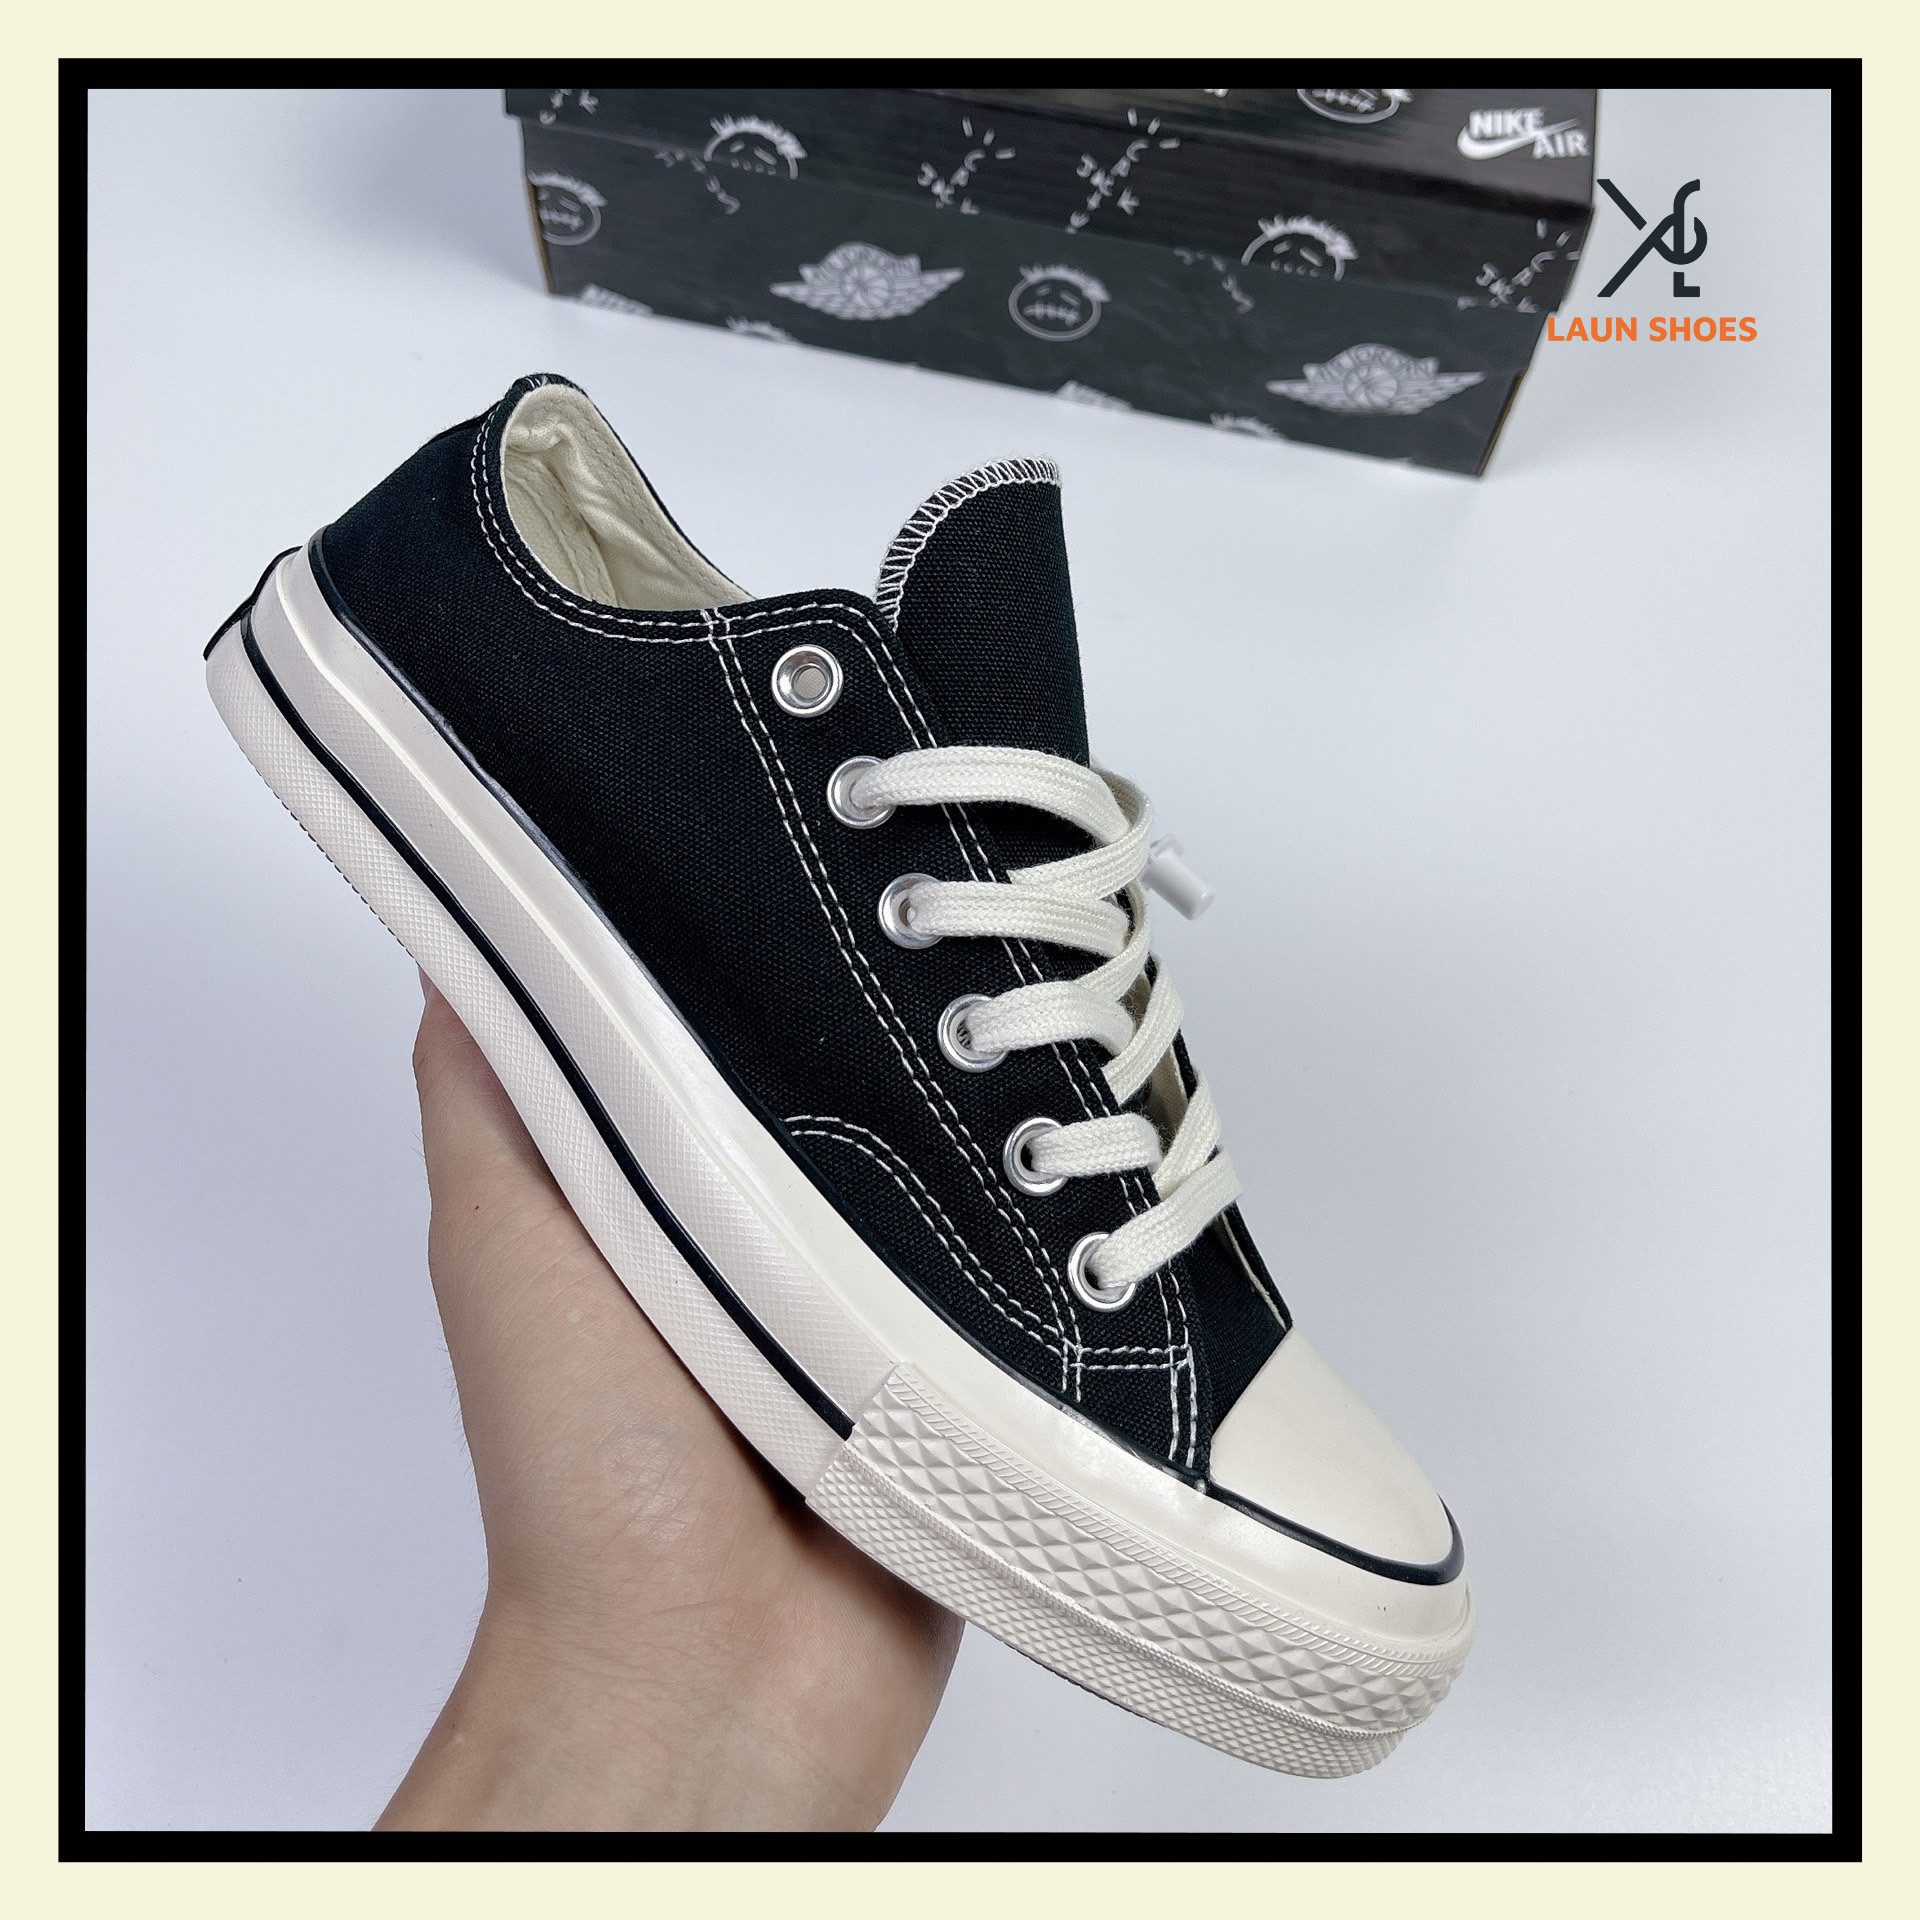 Converse Chuck Taylor All Star 1970s Black Low Rep 1:1 - LaunShoes - Giày  thể thao